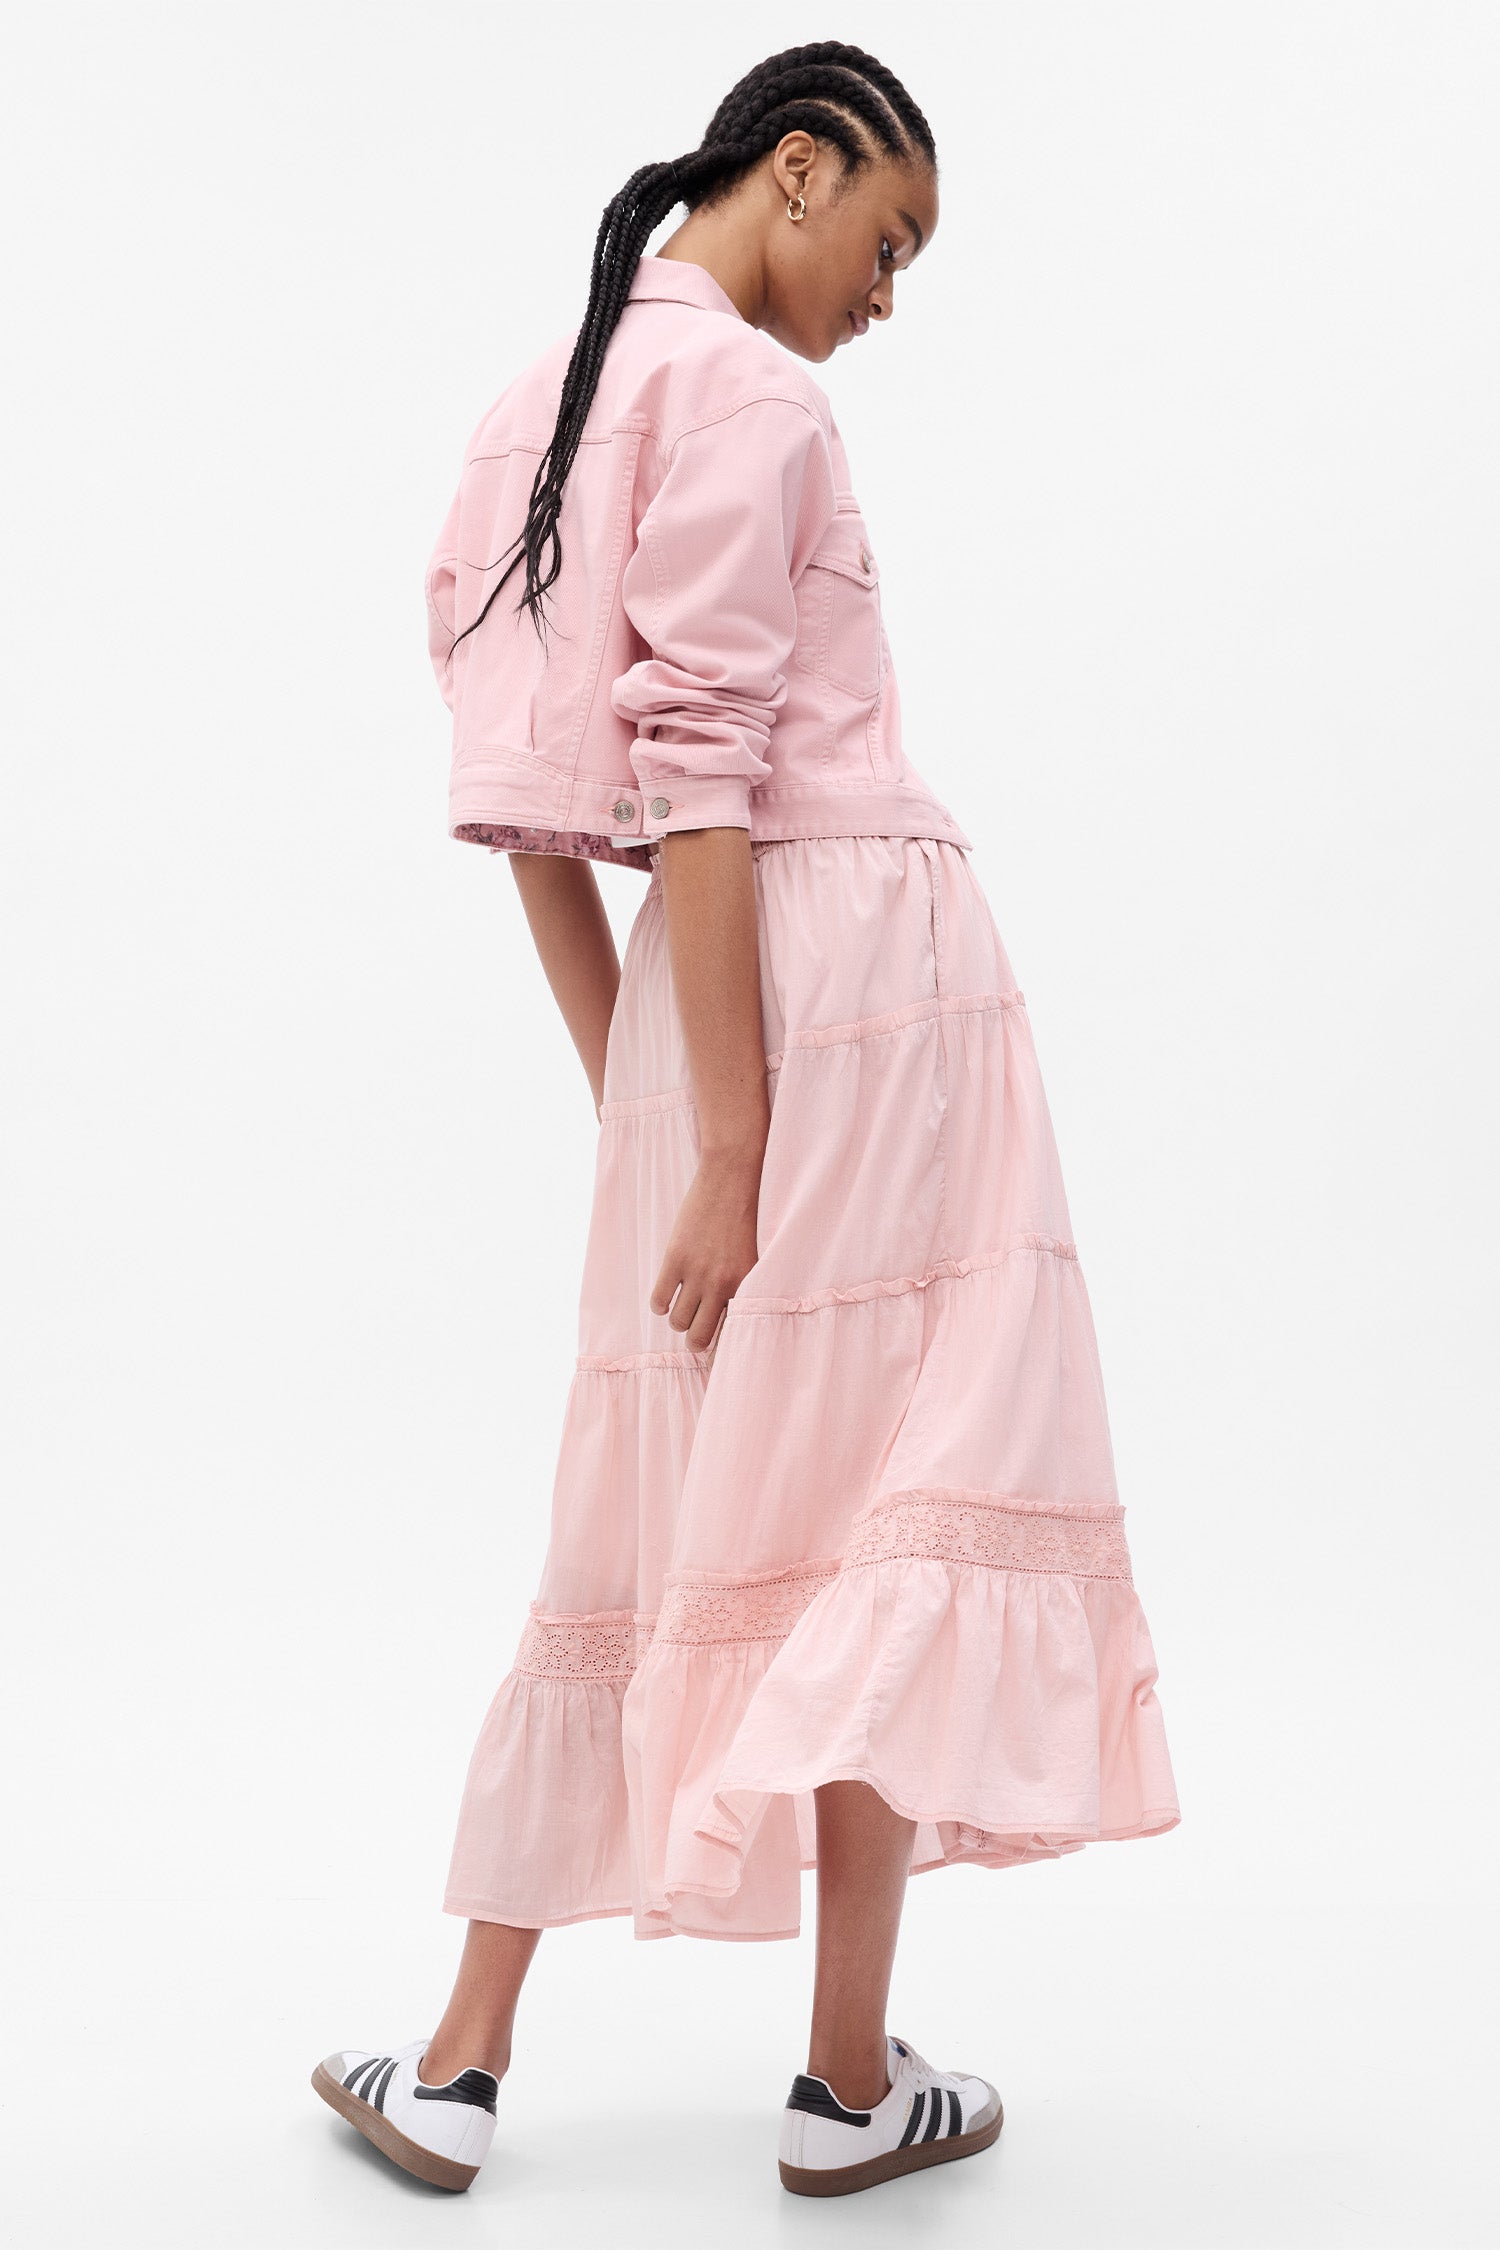 Back image of model wearing pink maxi skirt with eyelet detail and button up front